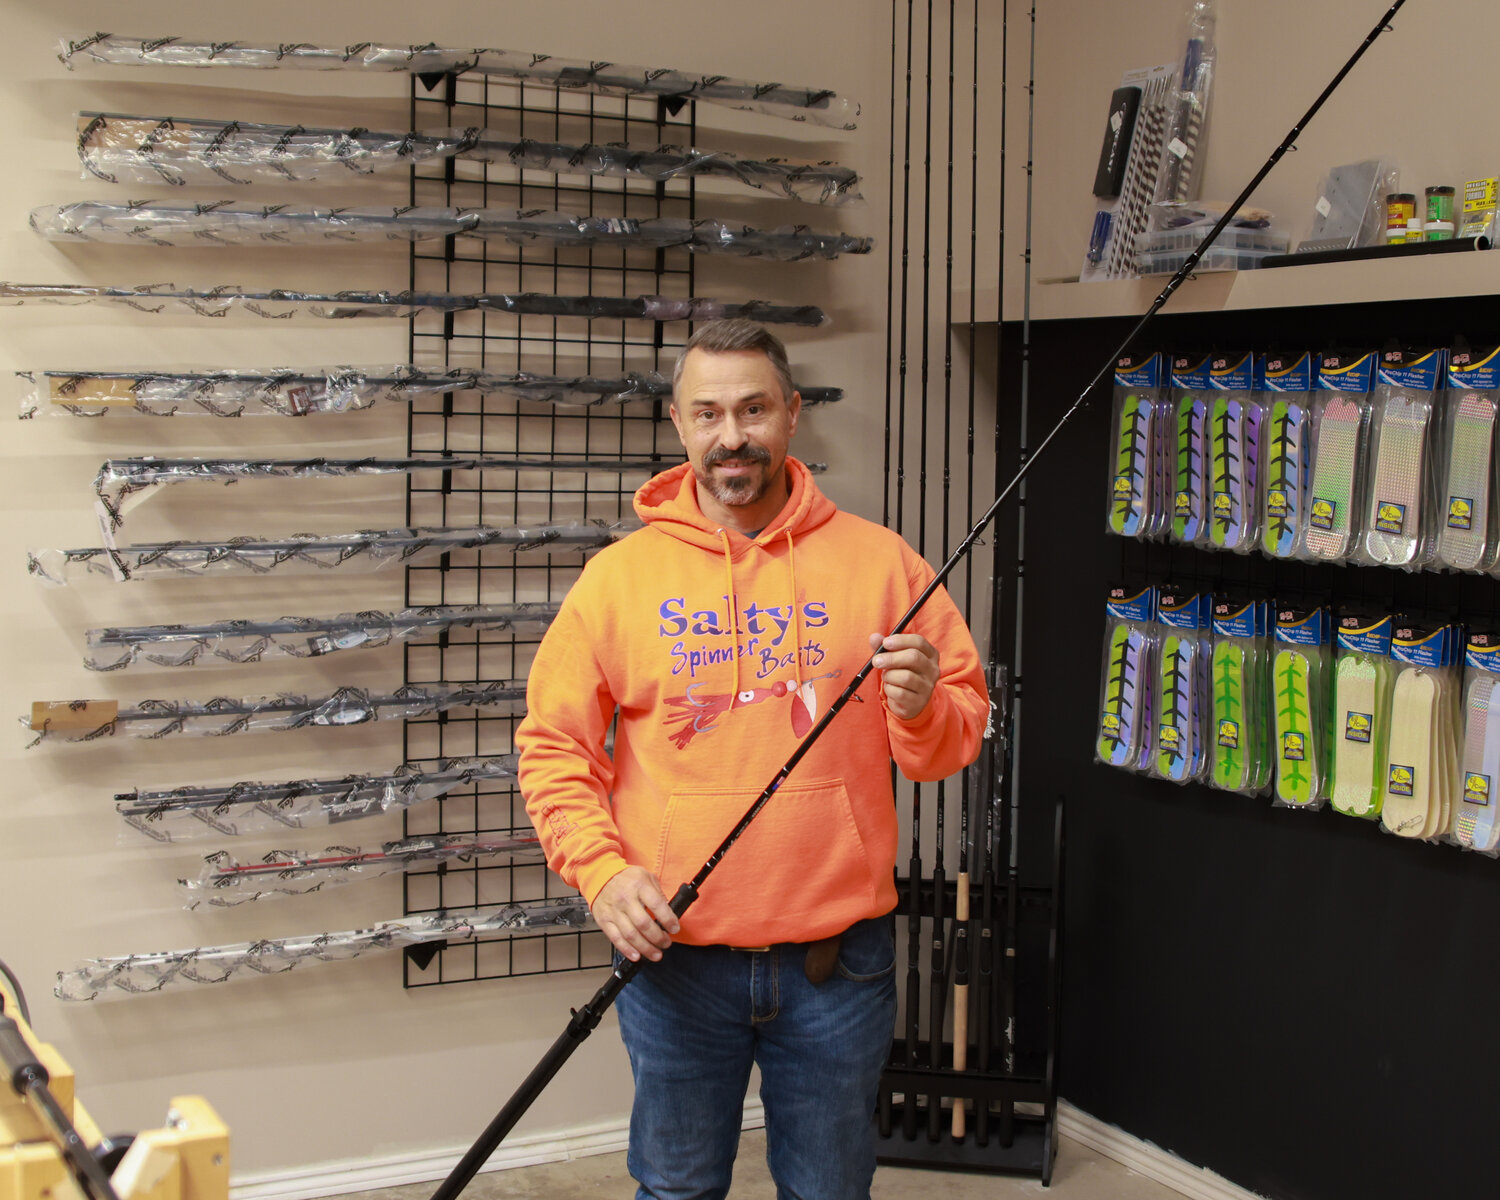 Thomas Hatcher, owner of Salty’s Spinners, stands in his Brush Prairie shop with a replica of the Lamiglas Kenai Kwik fishing rod that he built under the guidance of Thomas Hatcher.